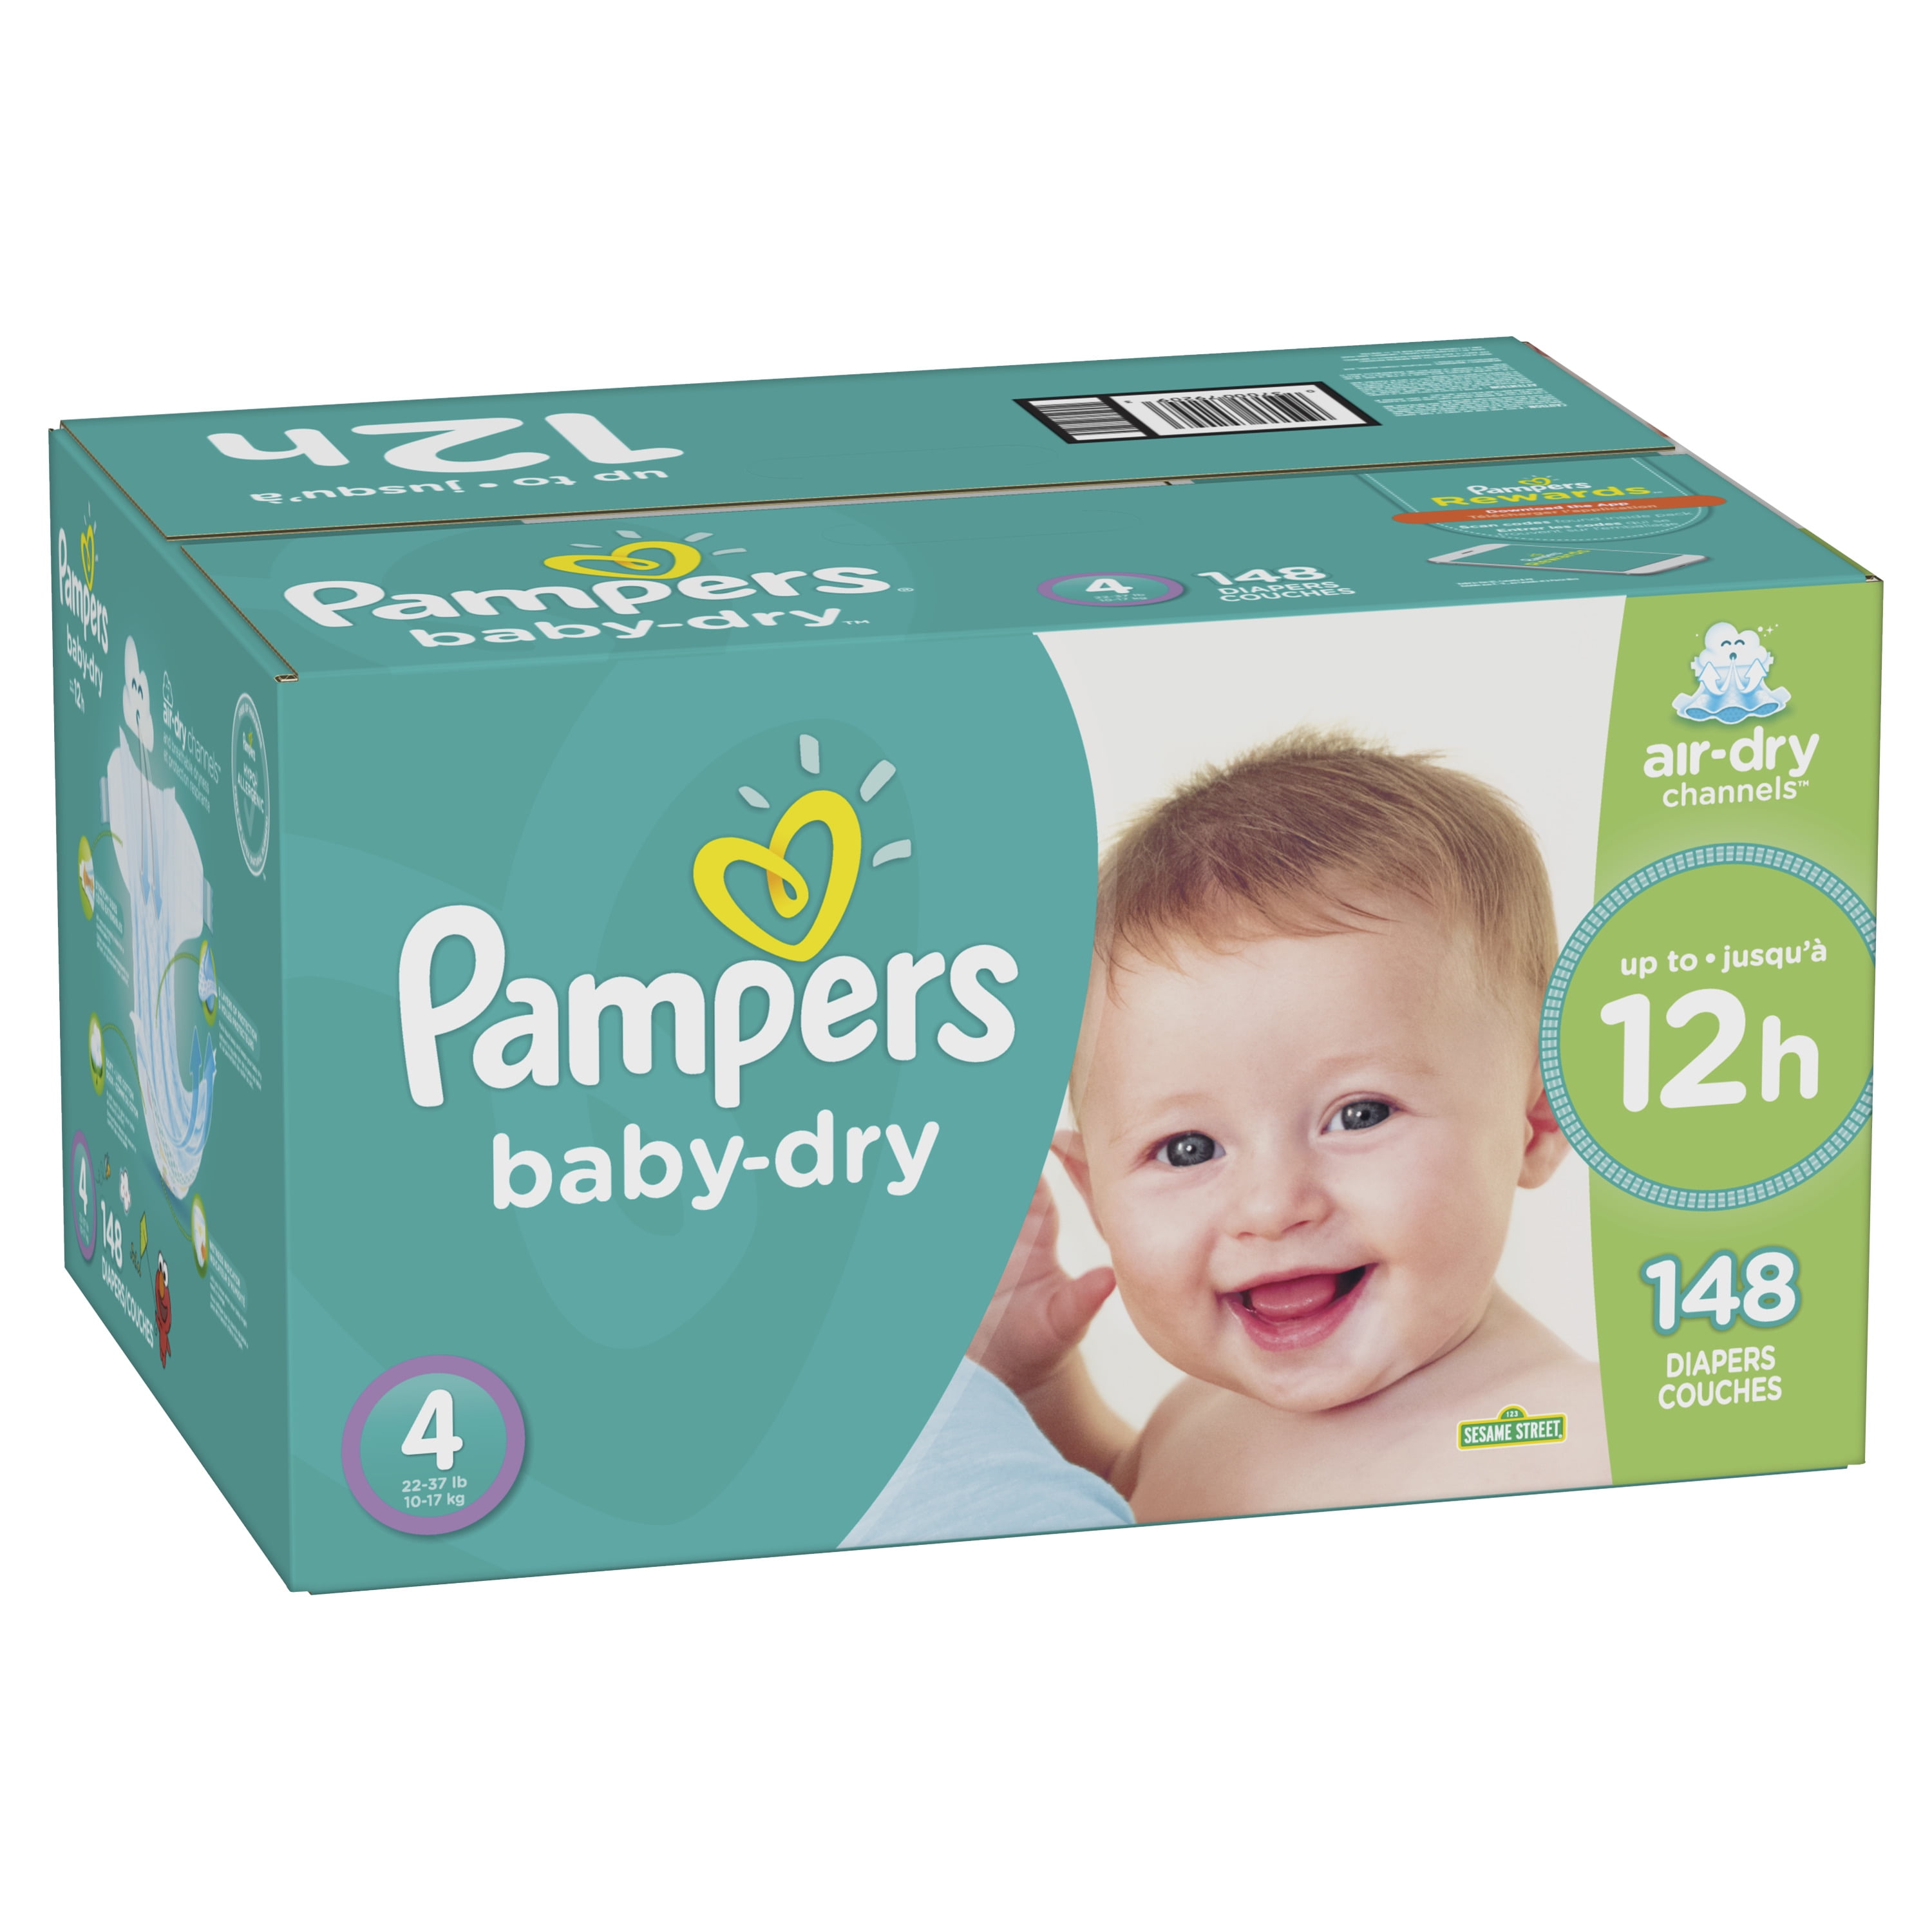 Pampers Baby-Dry Extra Protection Diapers, Size 4, 148 Count 